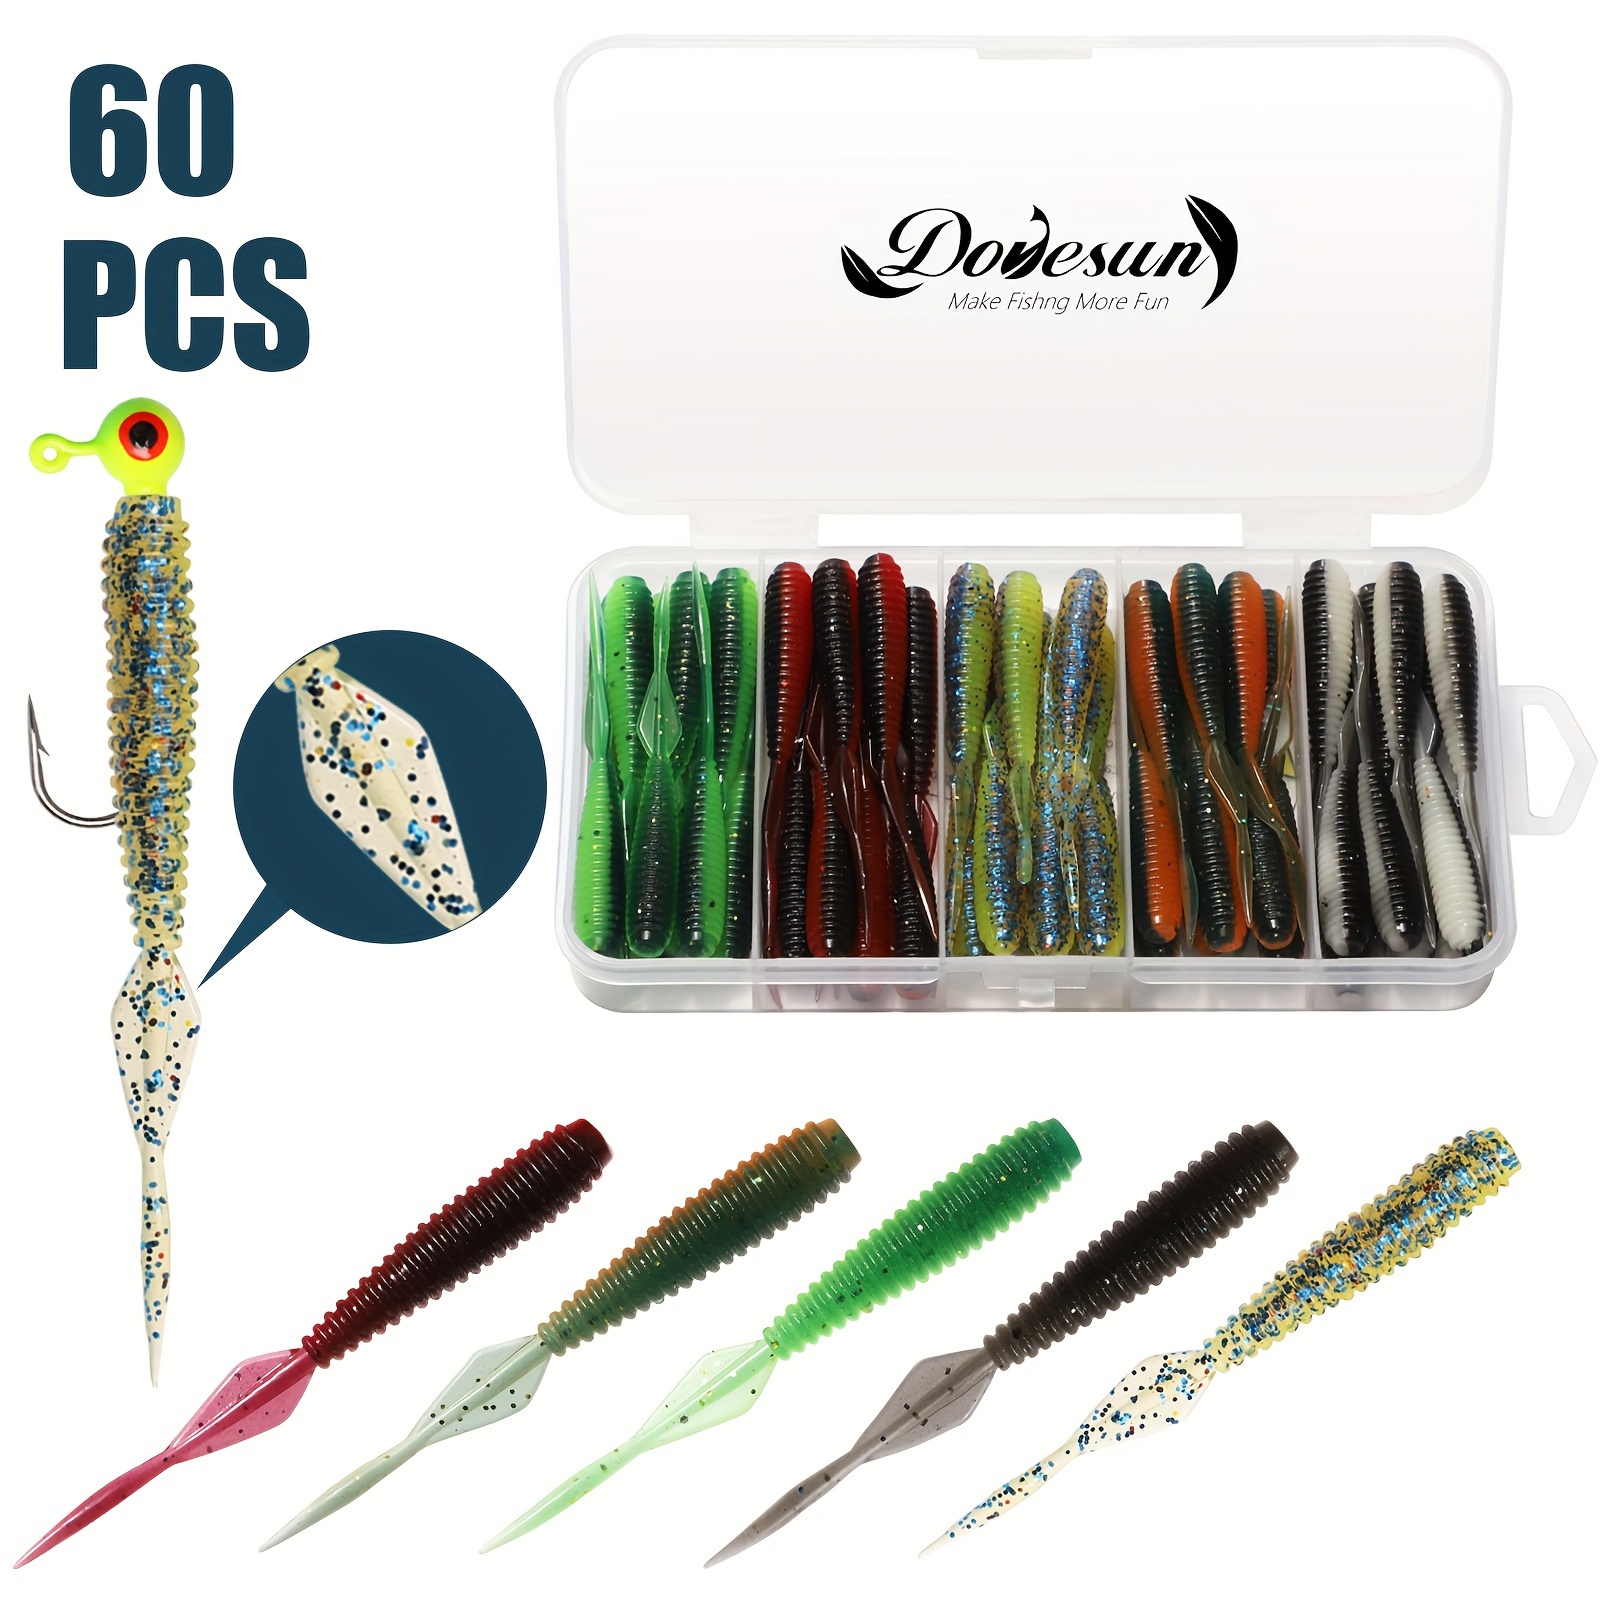 

Dovesun 60pcs/box Bass Lure Kit, Fishing Soft Plastic Lure For Crappie Walleye Trout, Fishing Baits With Tackle Box